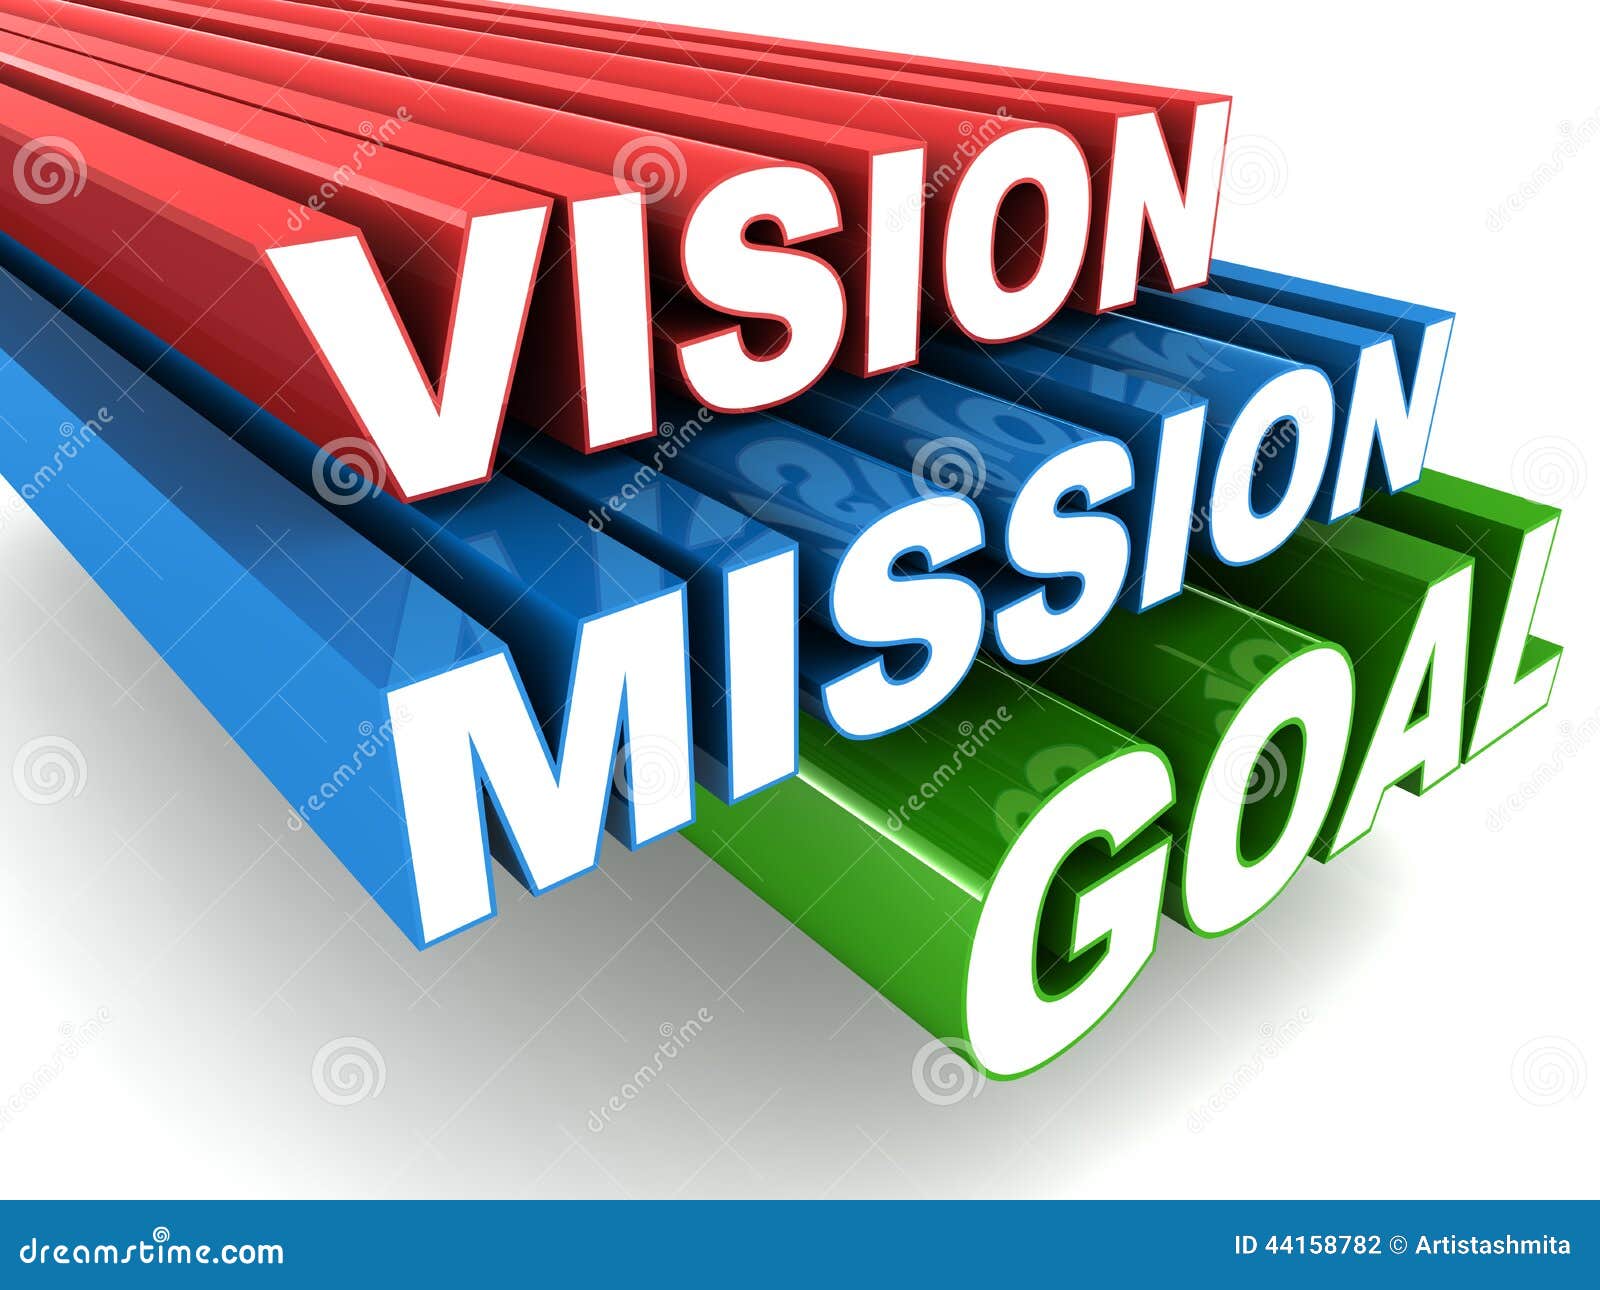 business vision clipart - photo #41